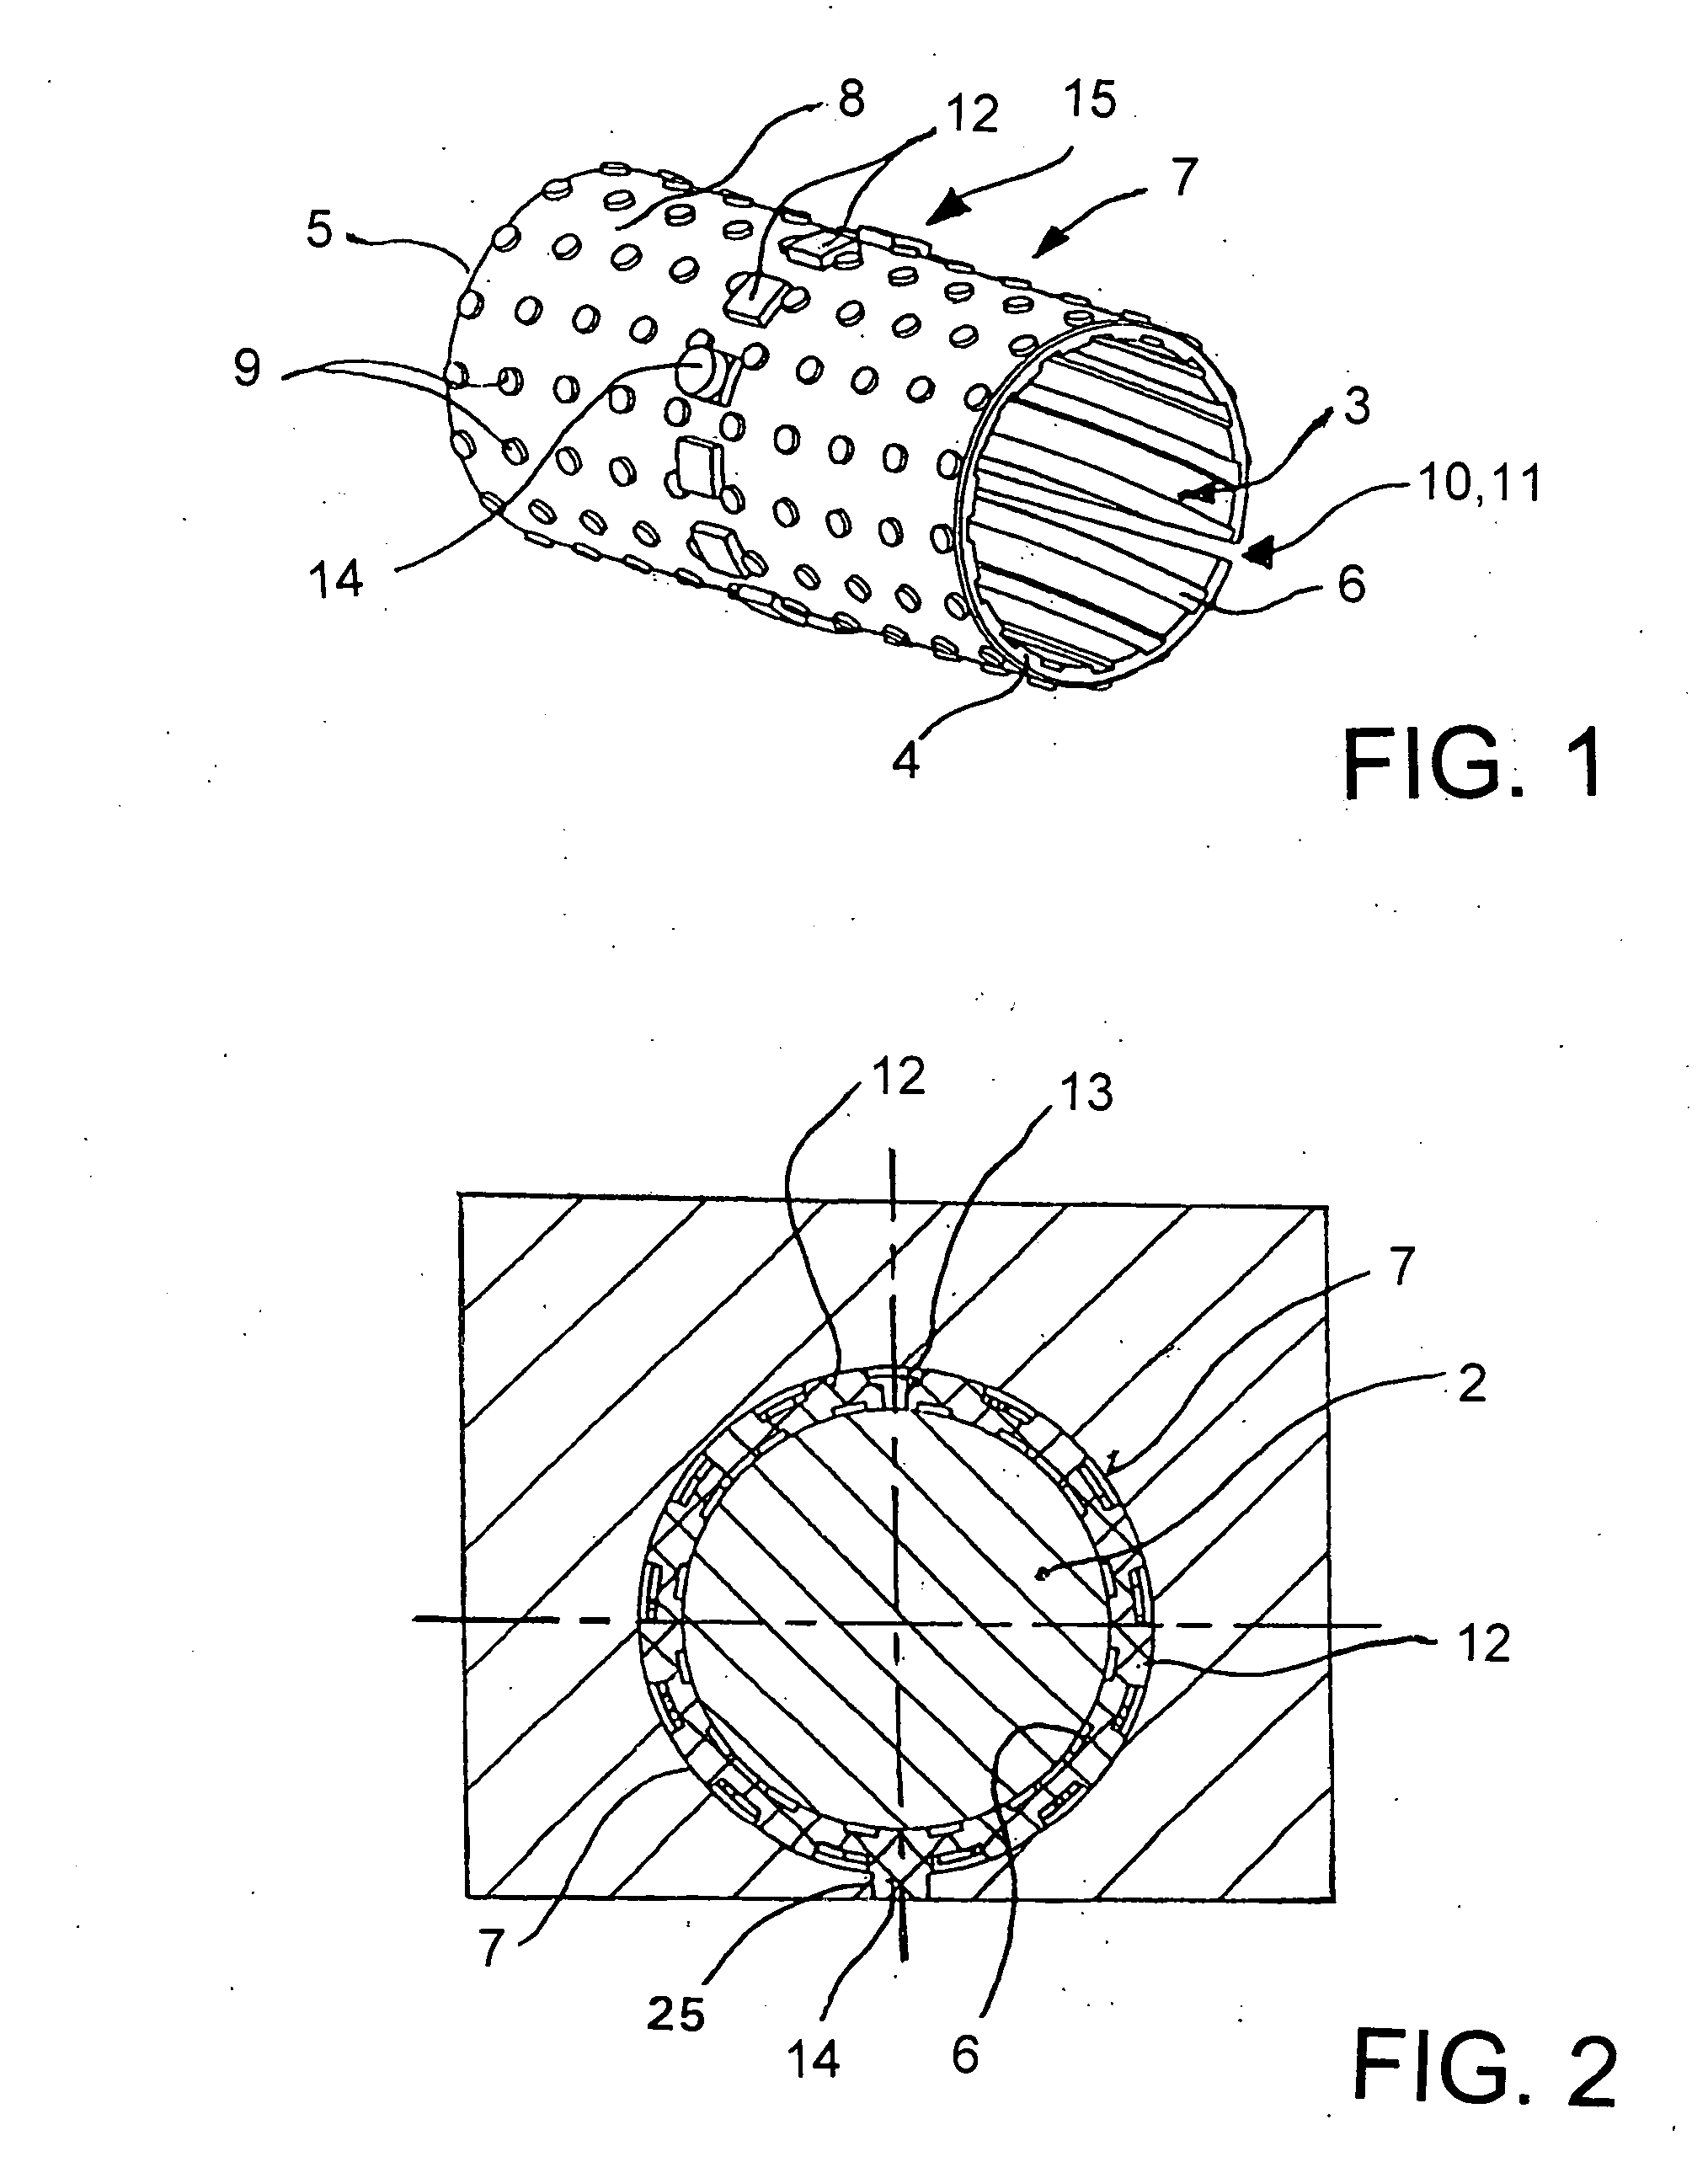 Beverage bottling plant having a beverage bottle closing machine with a bearing system to guide a reciprocating shaft in the beverage bottle closing machine